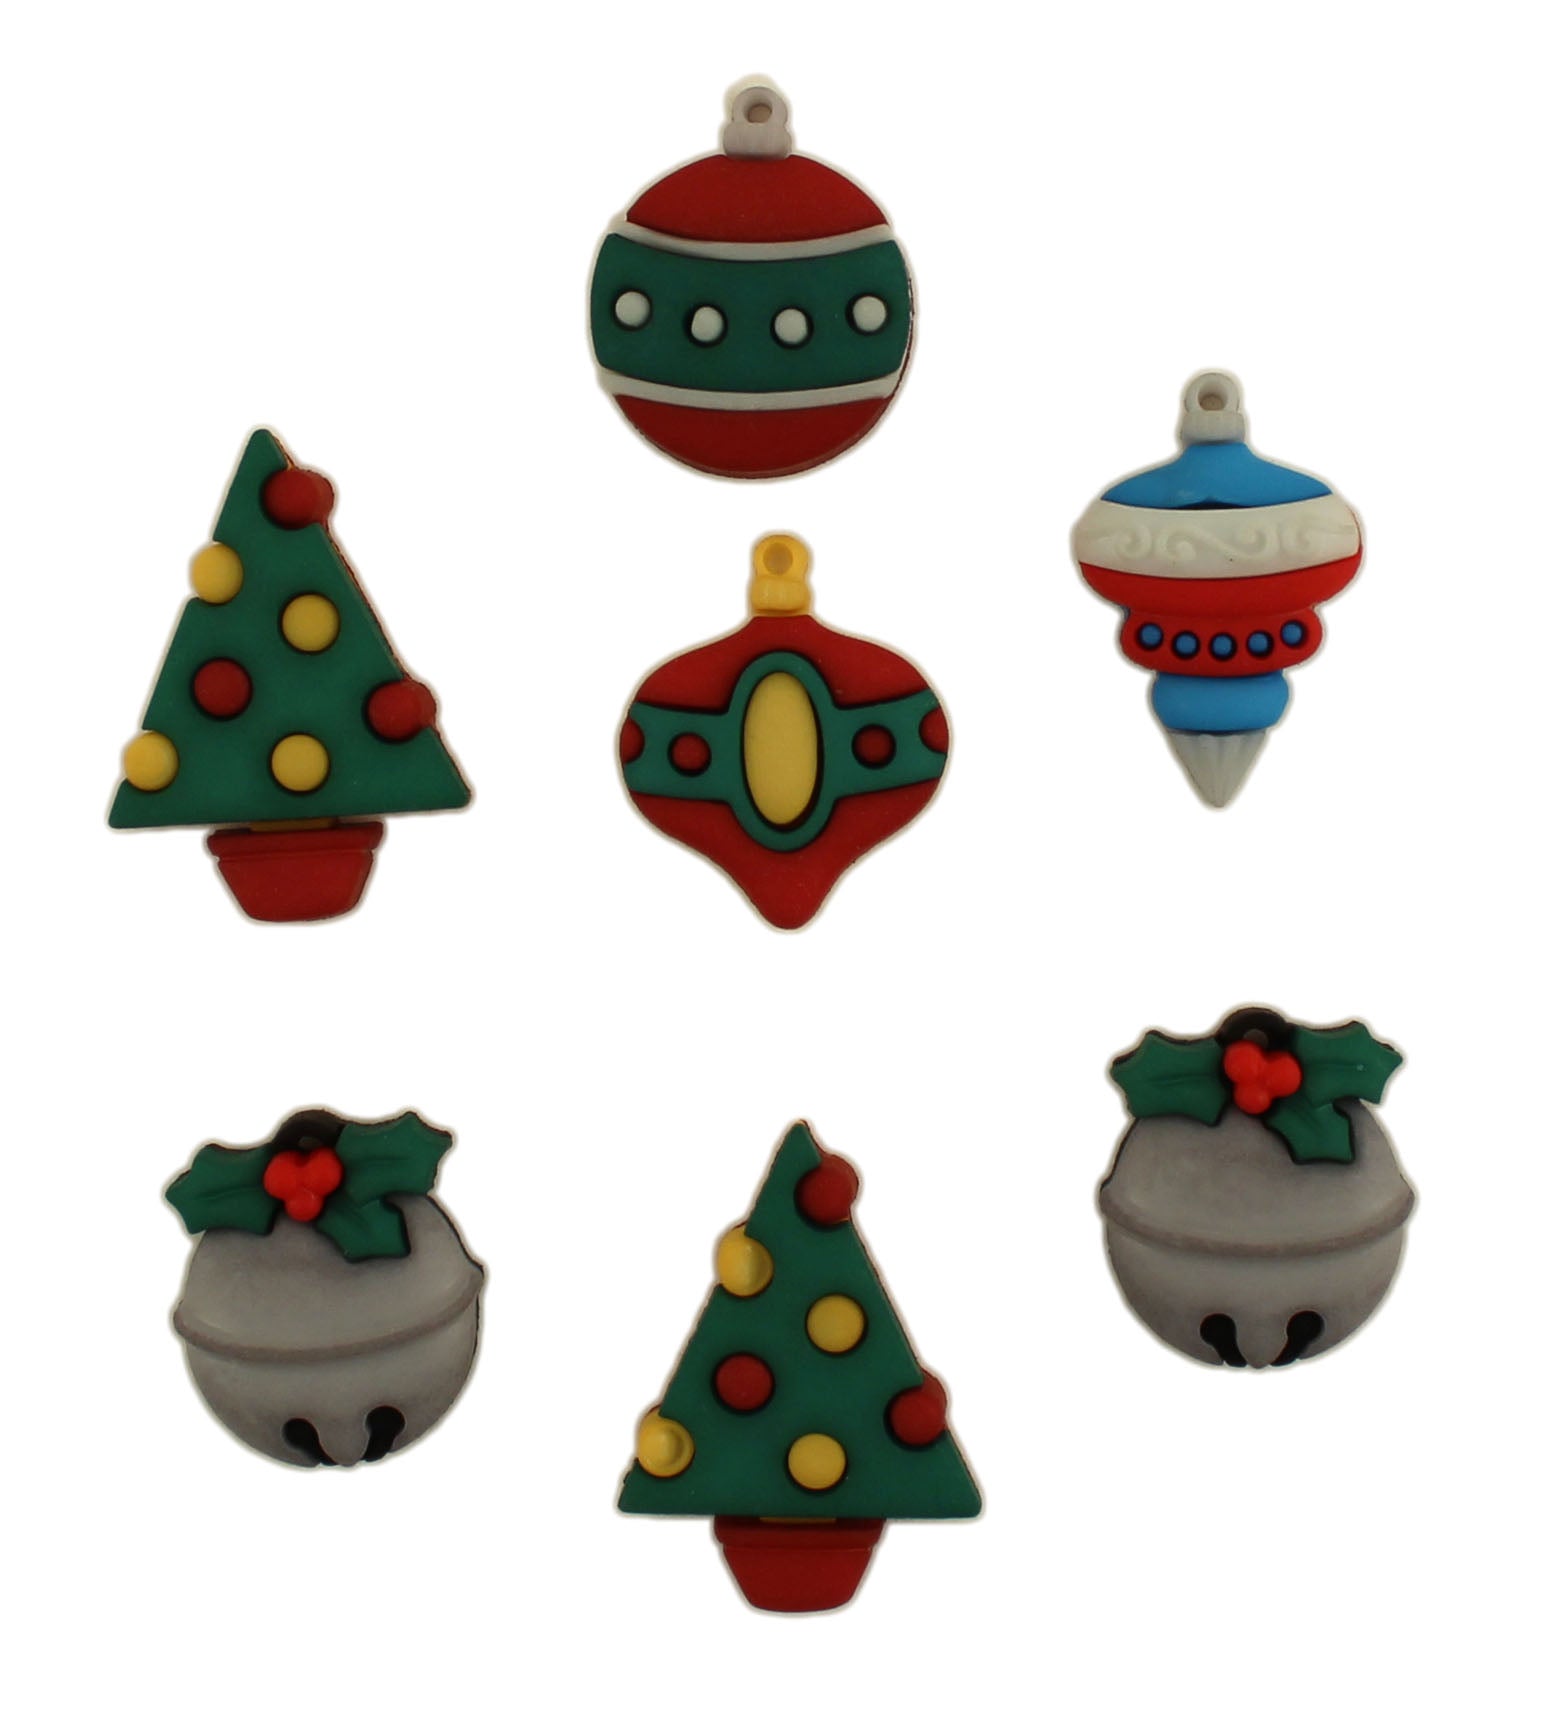 Christmas Set 1 - Buttons Galore and More